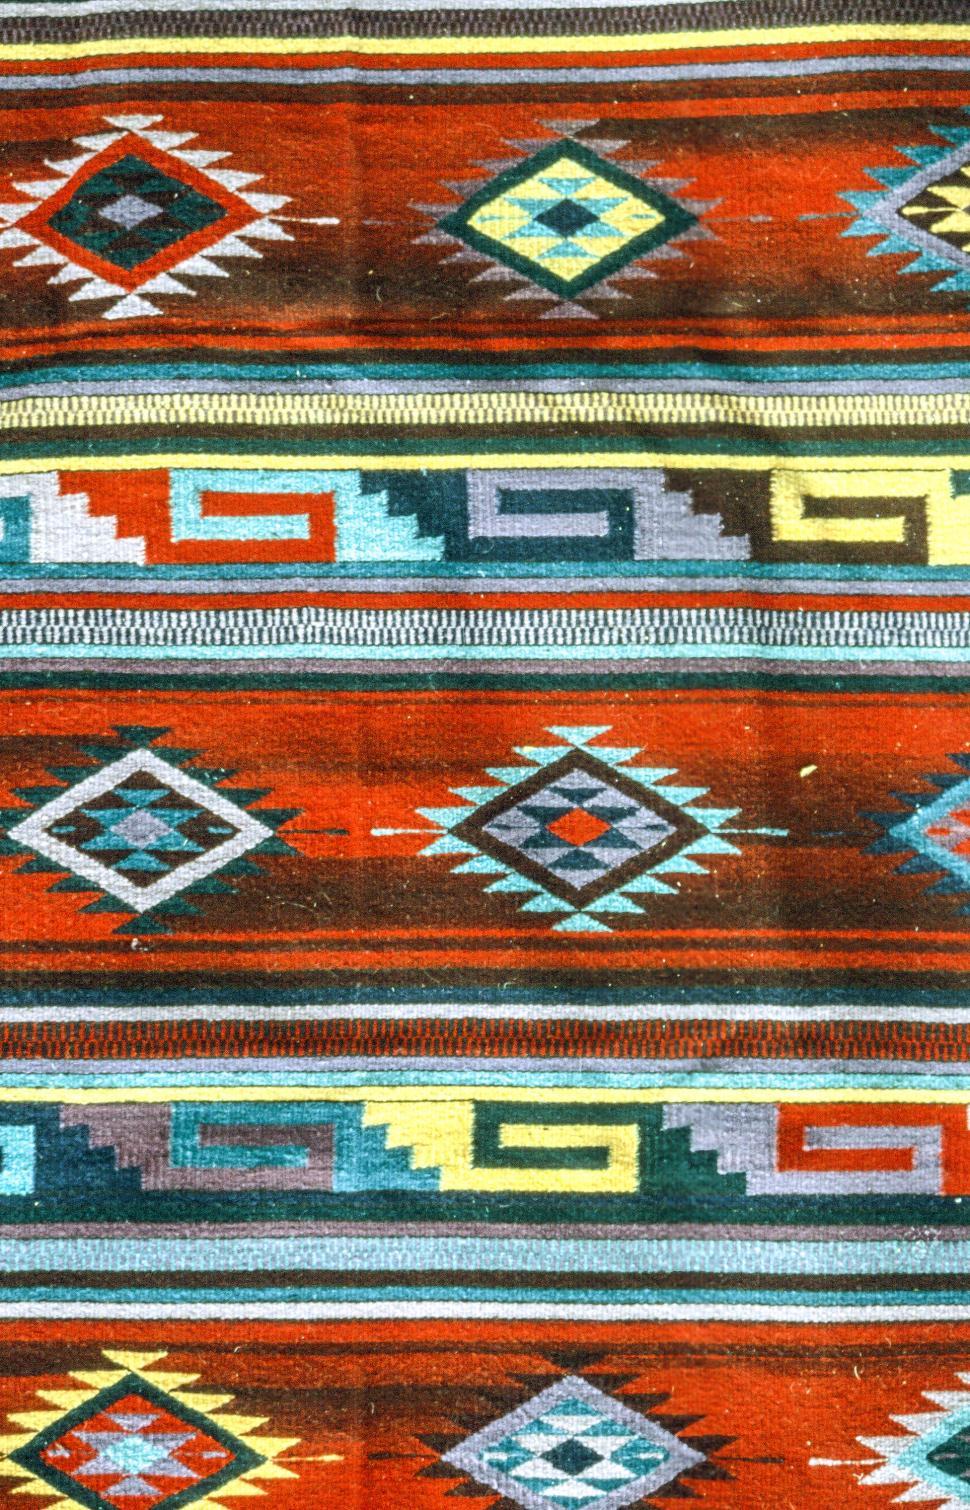 Free Image of Woven Native American Rug 